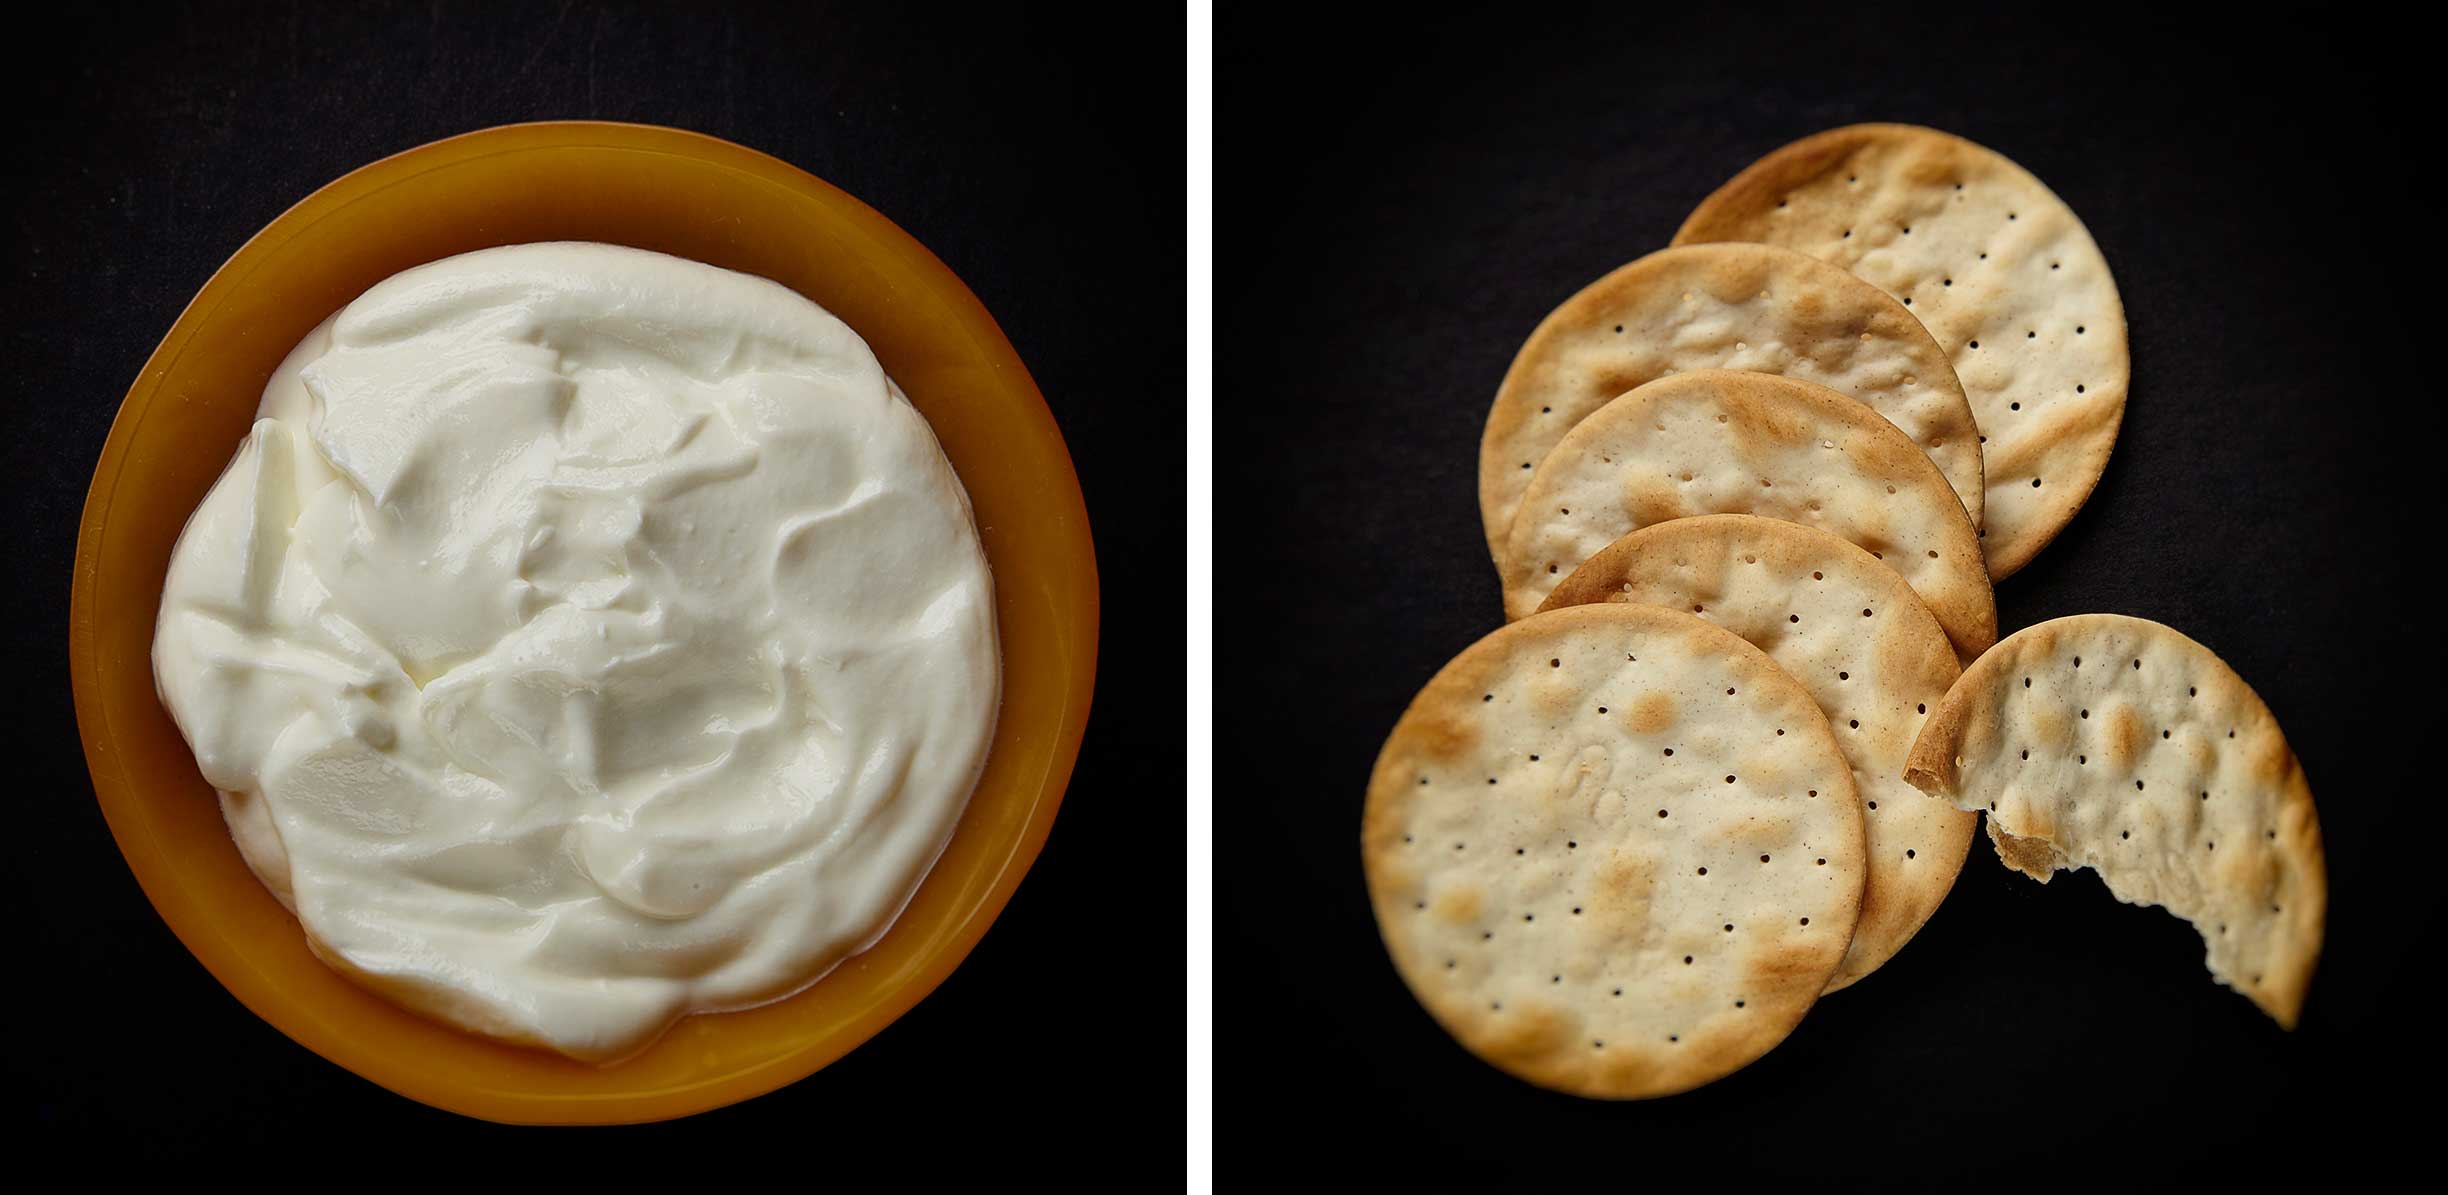  soda cracker and sour cream ©2016 by bret wills